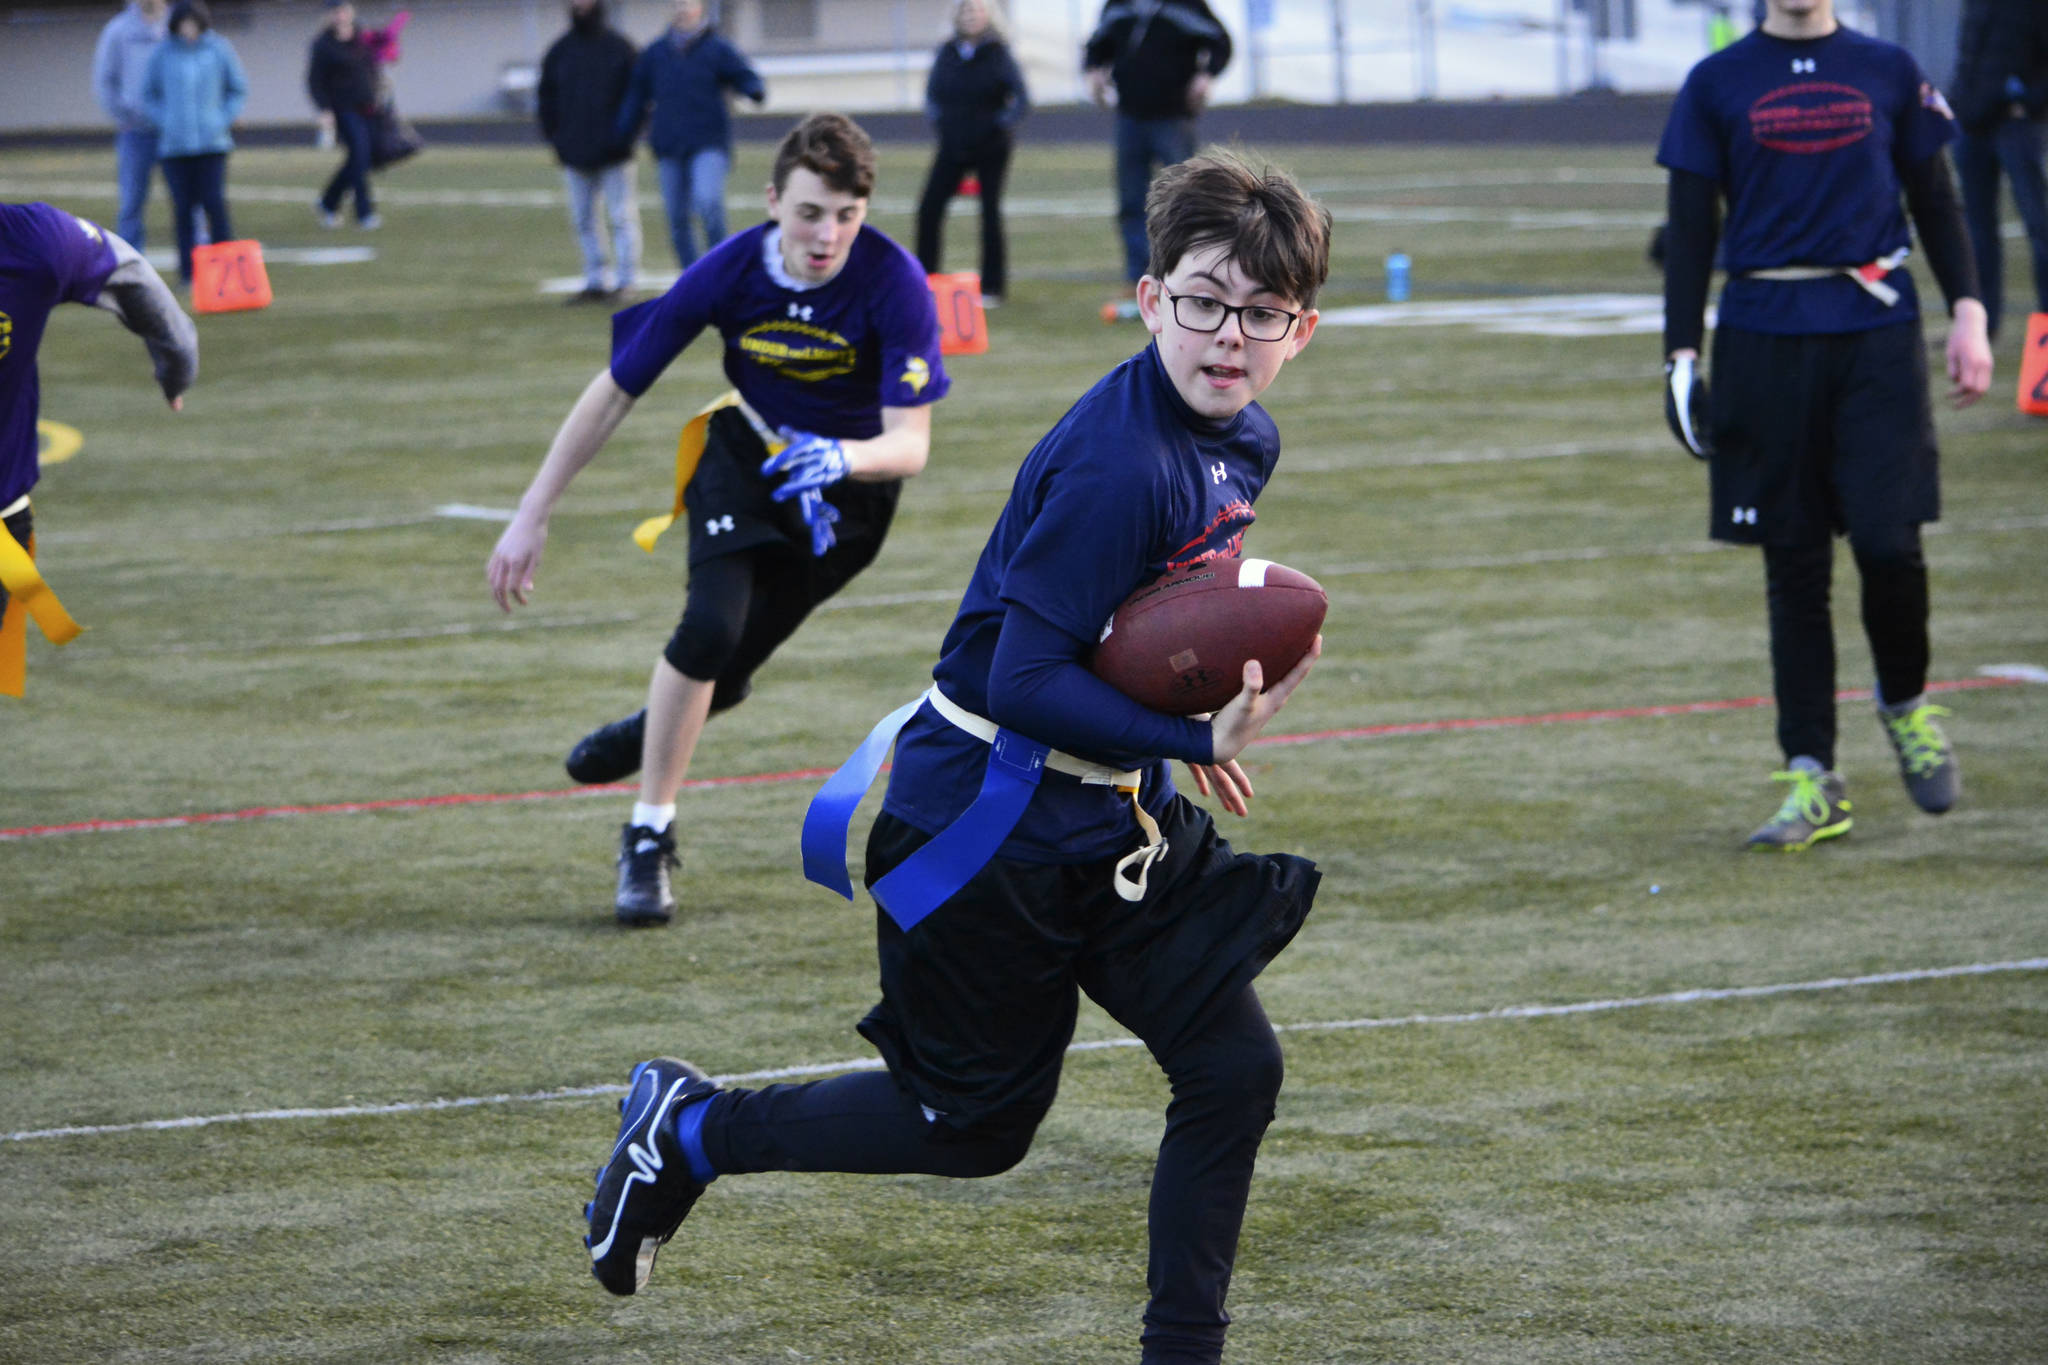 An athlete runs the ball during a championship game on March 31. Over 100 children were involved in the league. Mark Krulish | Kitsap Daily News